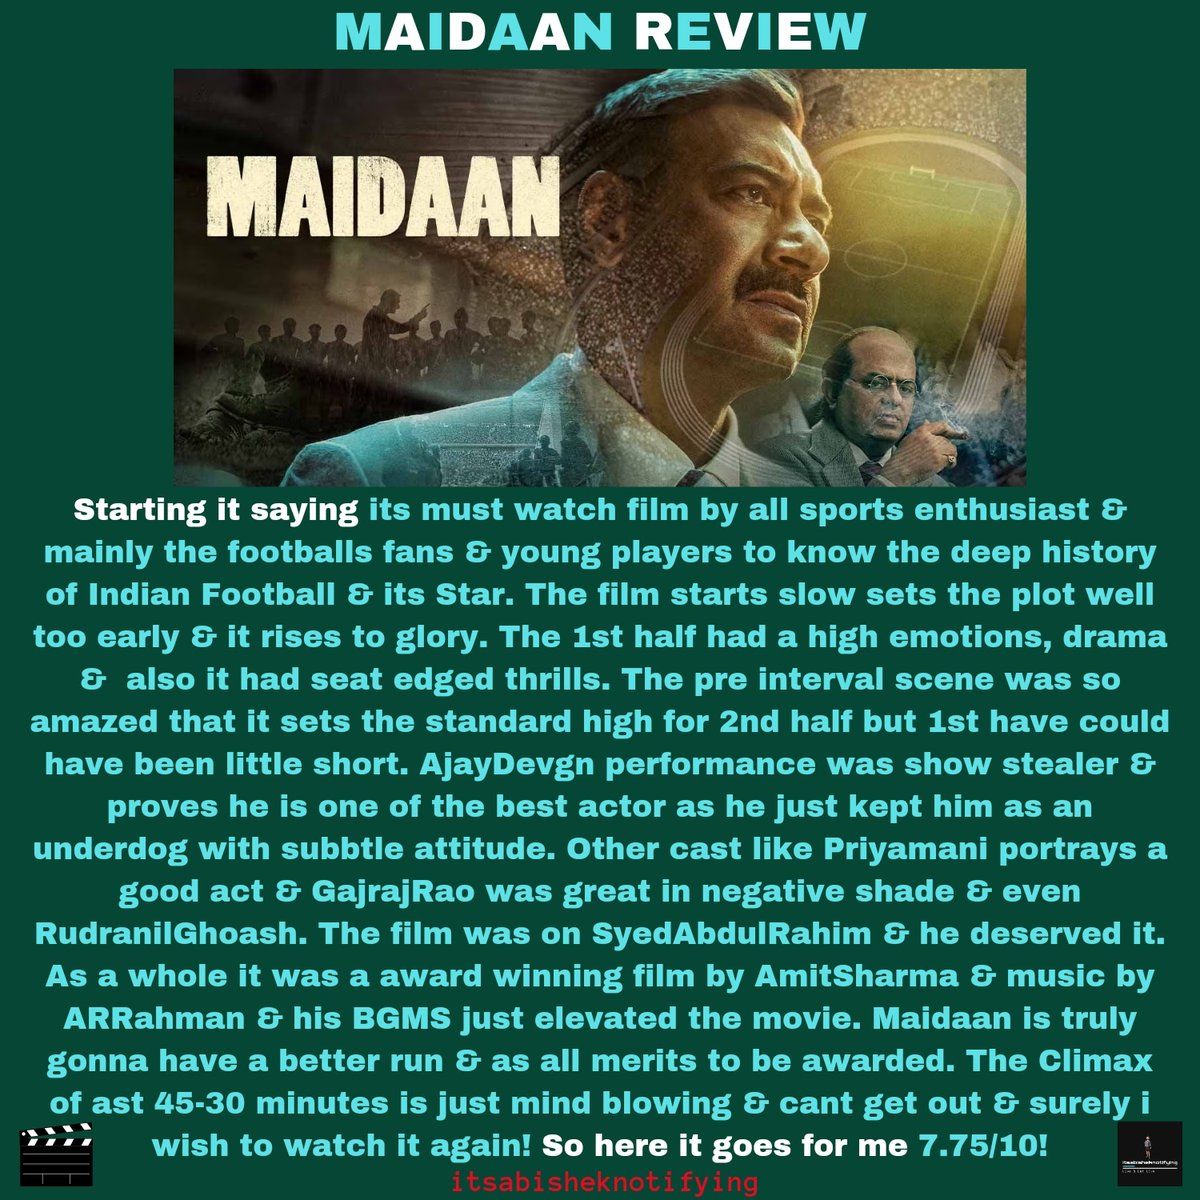 #MaidaanReview

#Maidaan should not be missed on big screens. A deserved one for #SyedAbdulRahim which was played by #AjayDevgan & it was a show stealer. Other cast supported very well. Pre interval & last 45 minutes of climax still ringing the mind & it's fabulous.
It's 7.75/10!